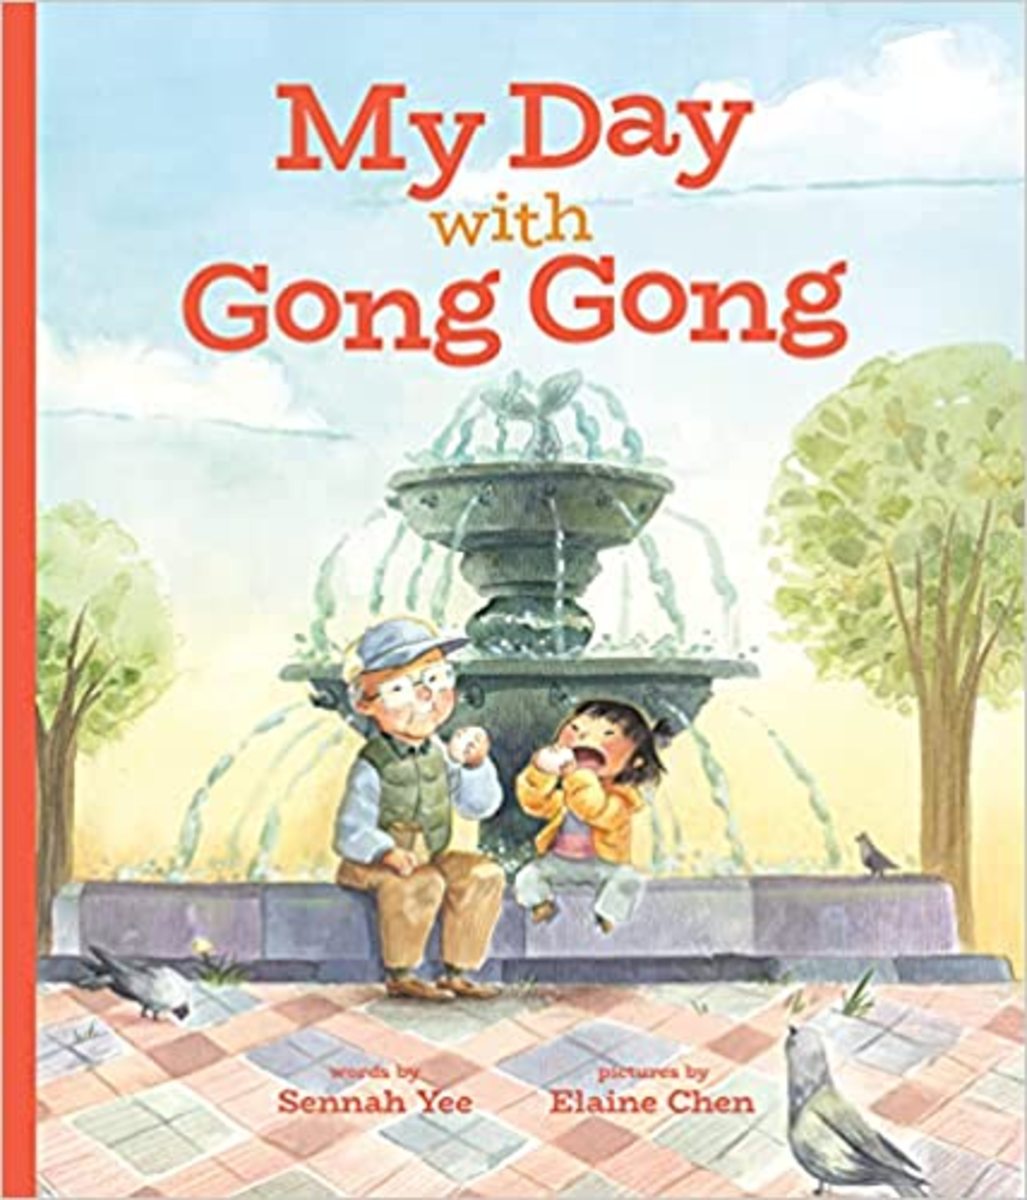 My Day with Gong Gong by Sennah Yee